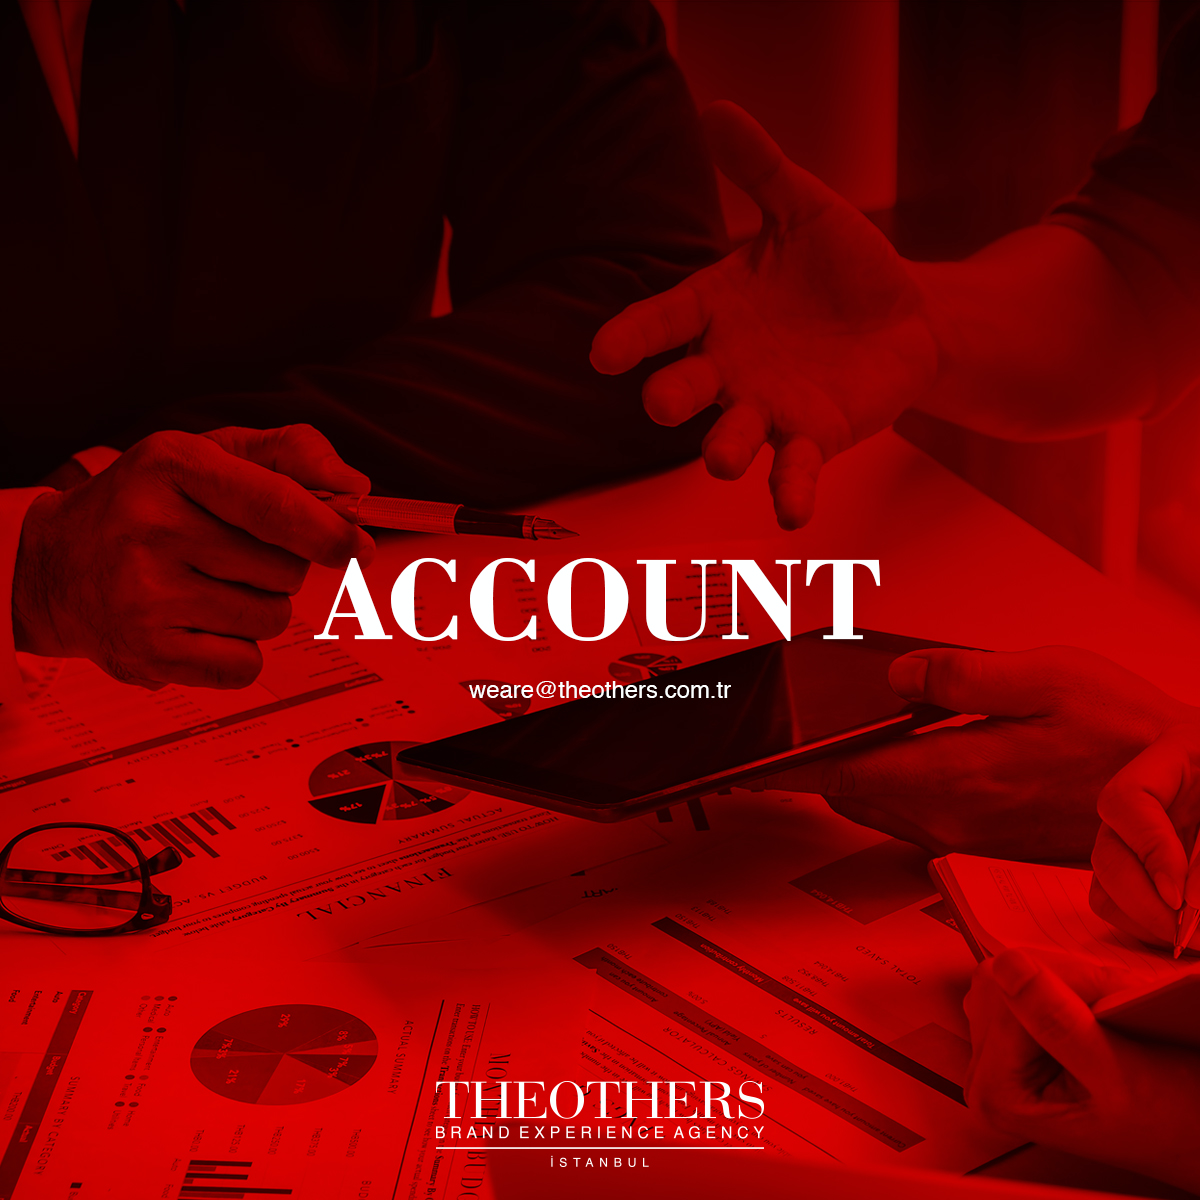 The Others, Account Manager arıyor!